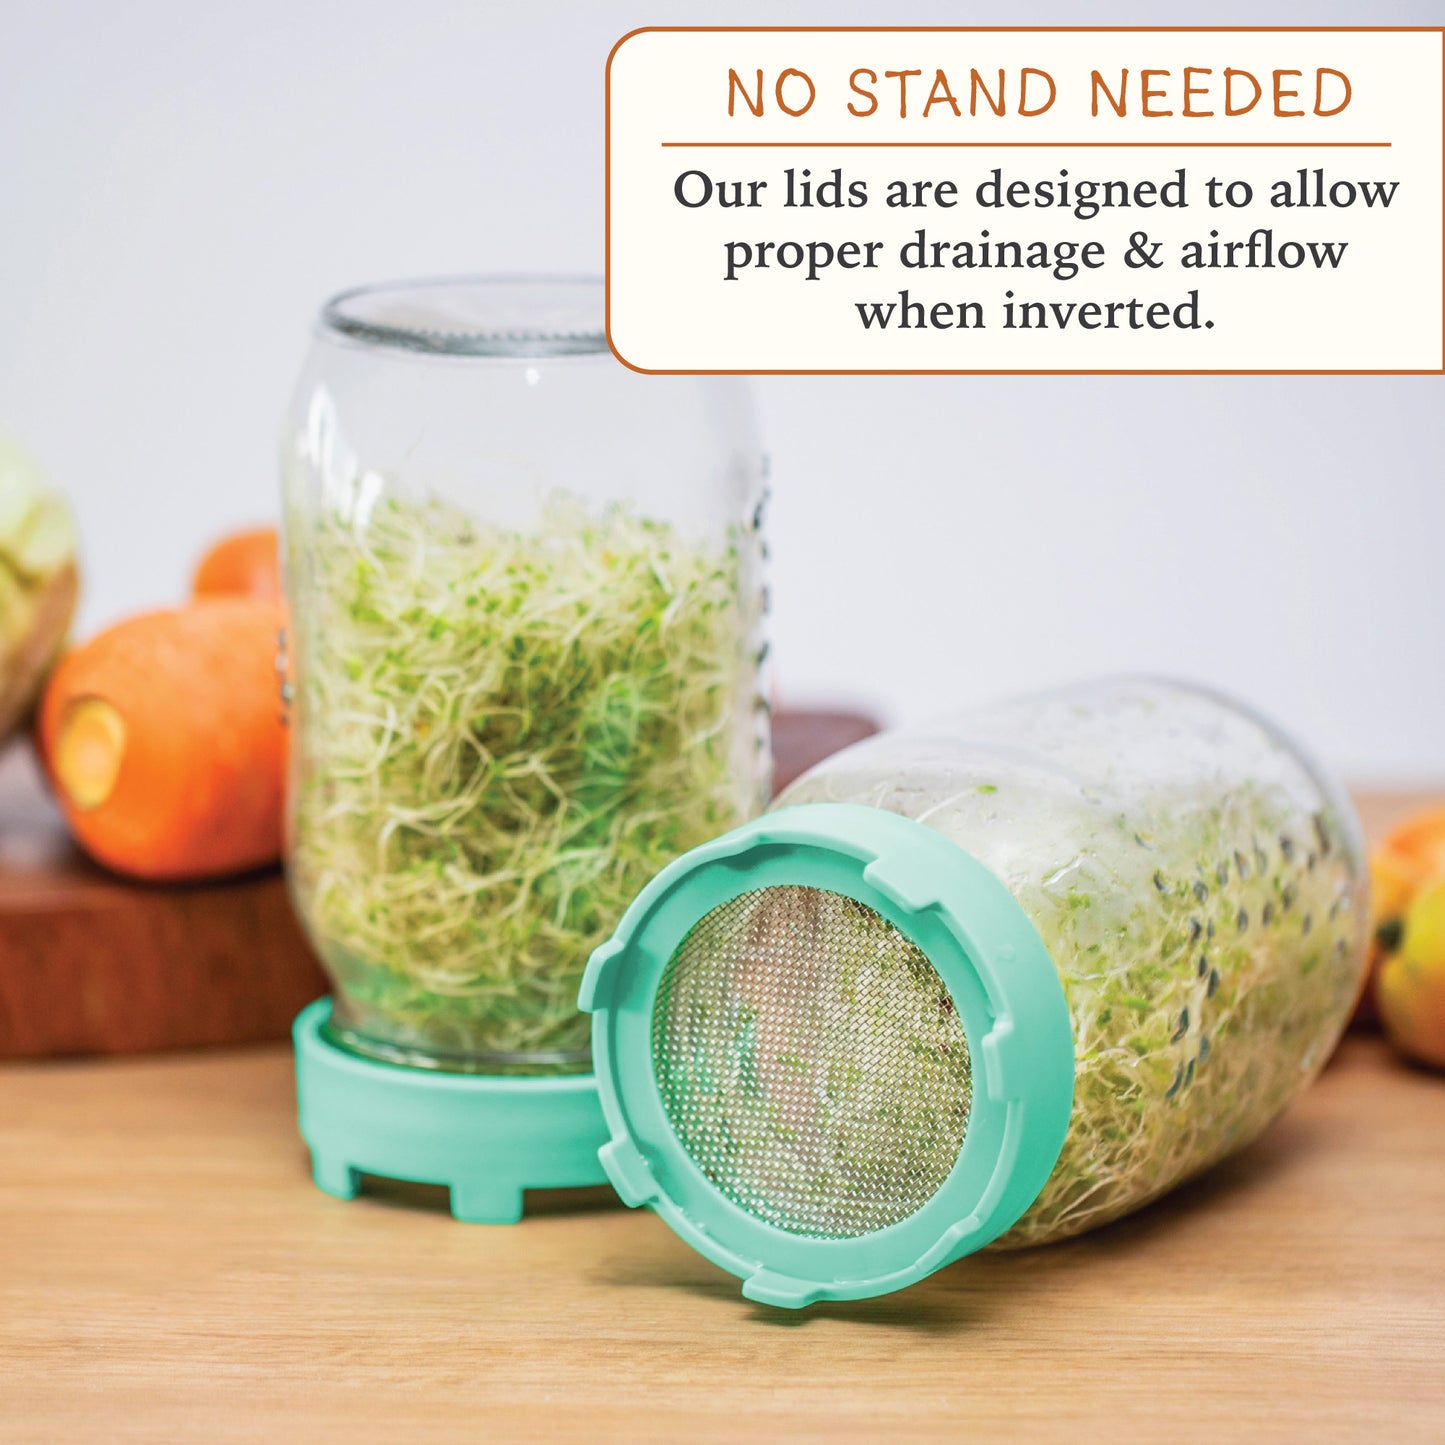 Elementi Sprouting Kit - Set of 2 Sprouting Lids for Wide Mouth Mason Jars (Maple Orange)